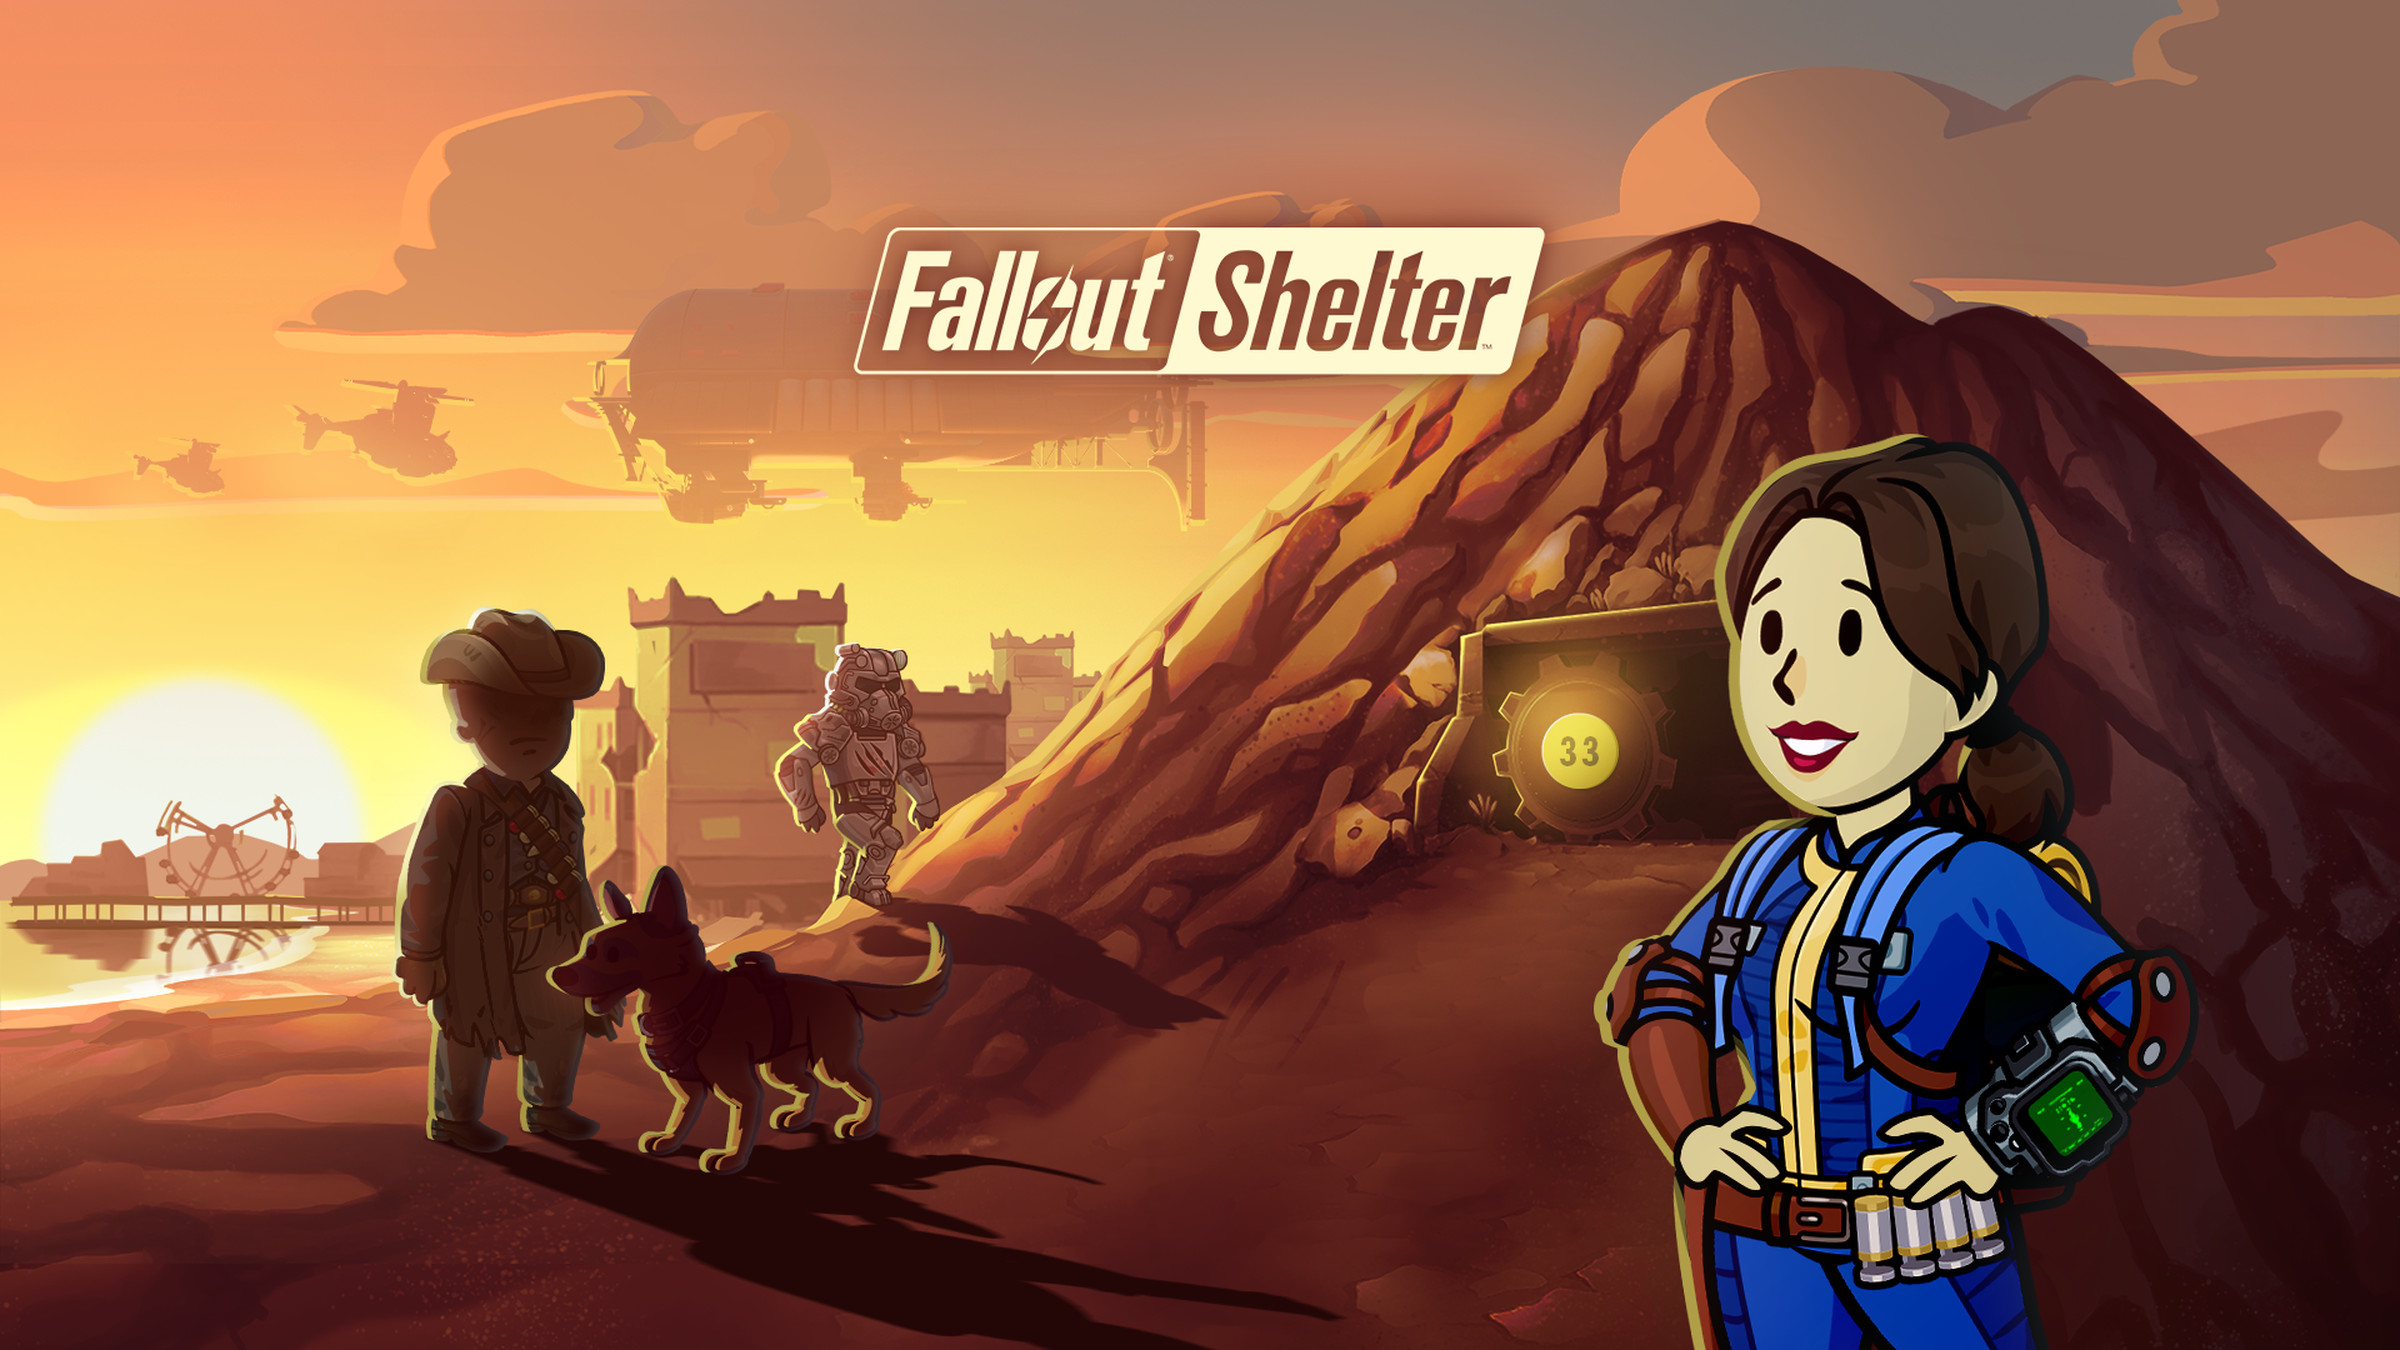 Promotional art for Fallout Shelter.